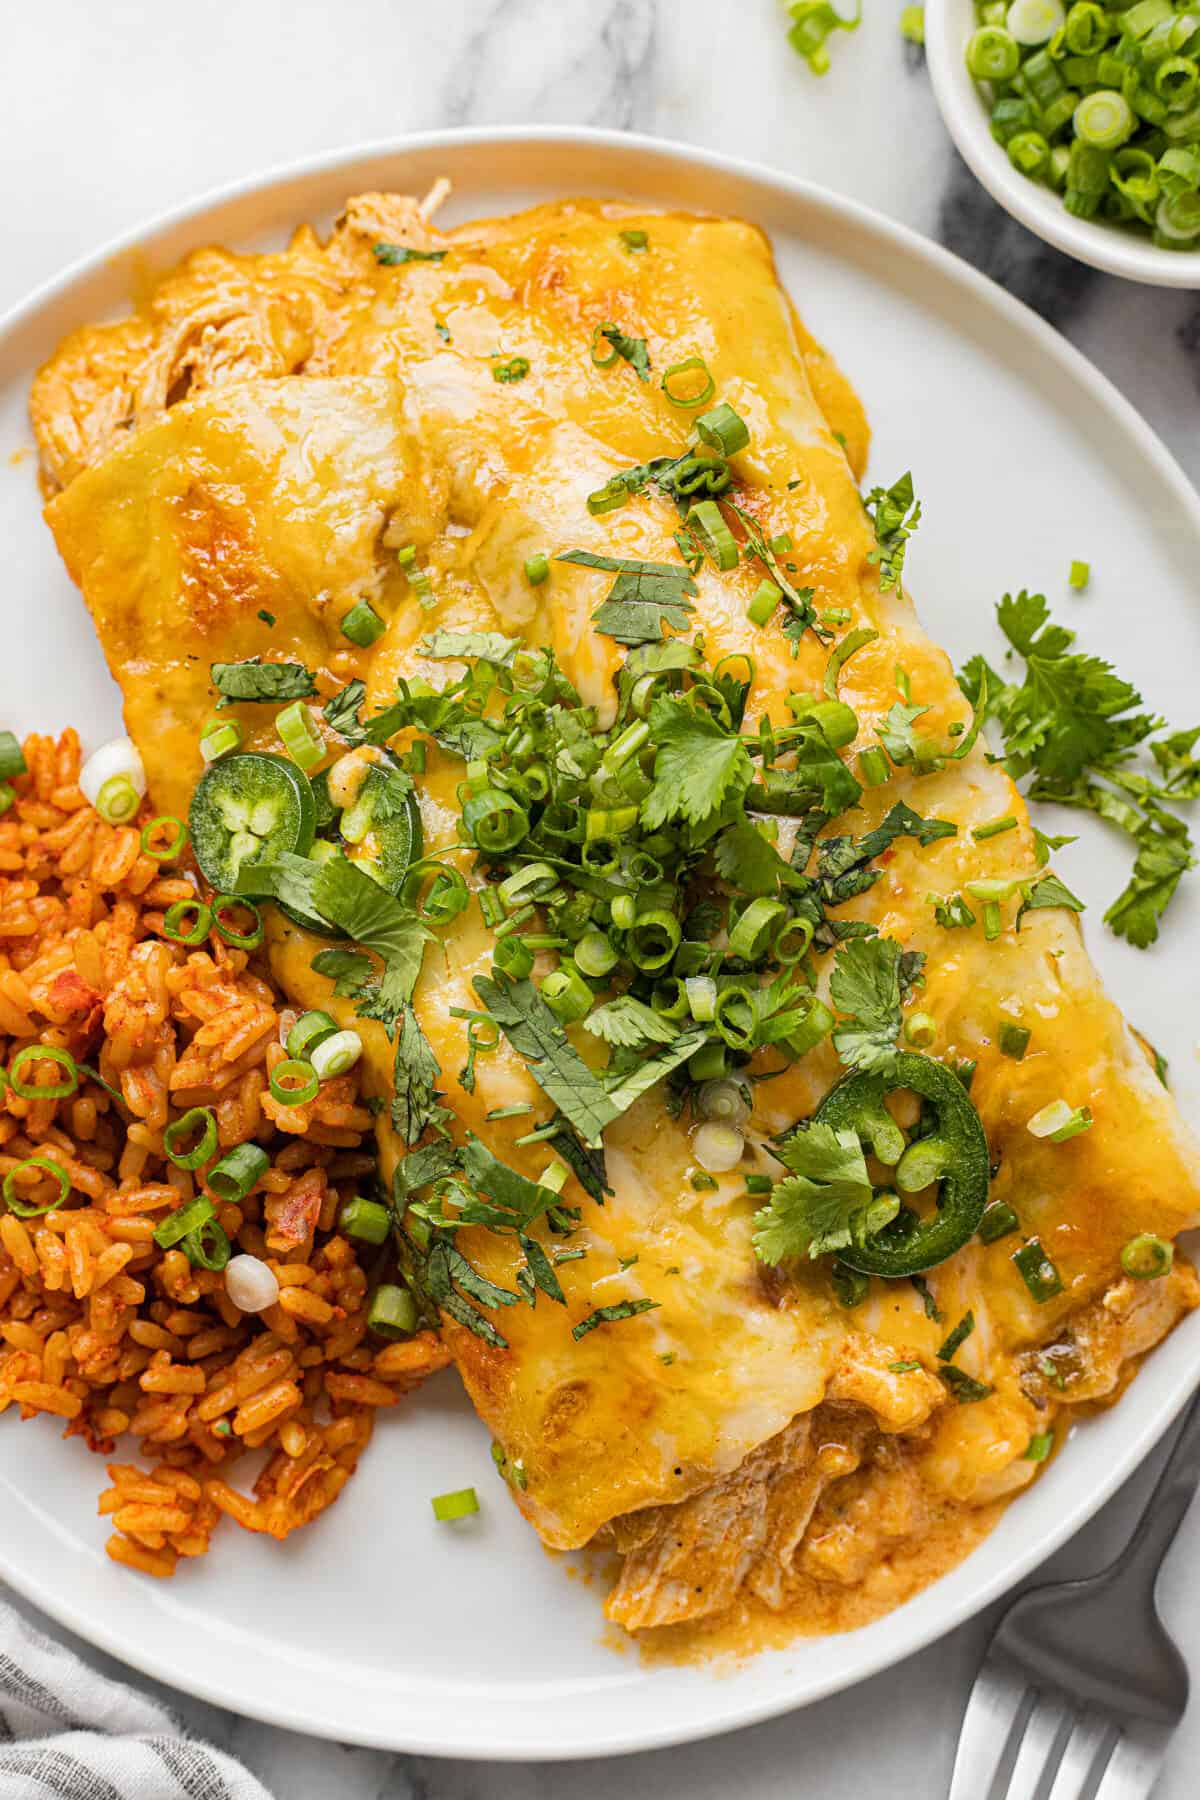 Two green enchiladas garnished with cilantro on a plate with rice.